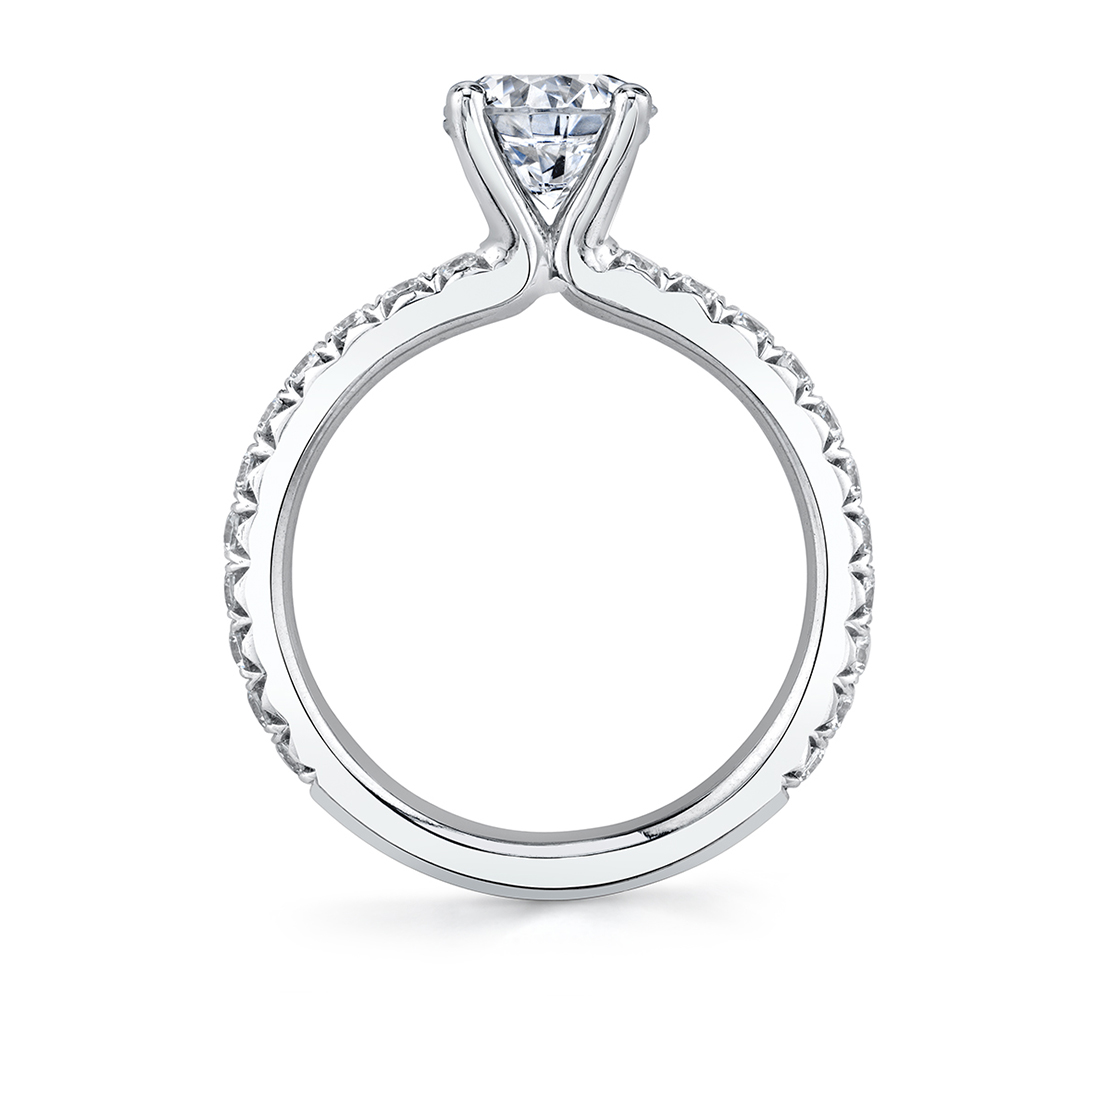 Side view of classic engagement ring - Vanessa